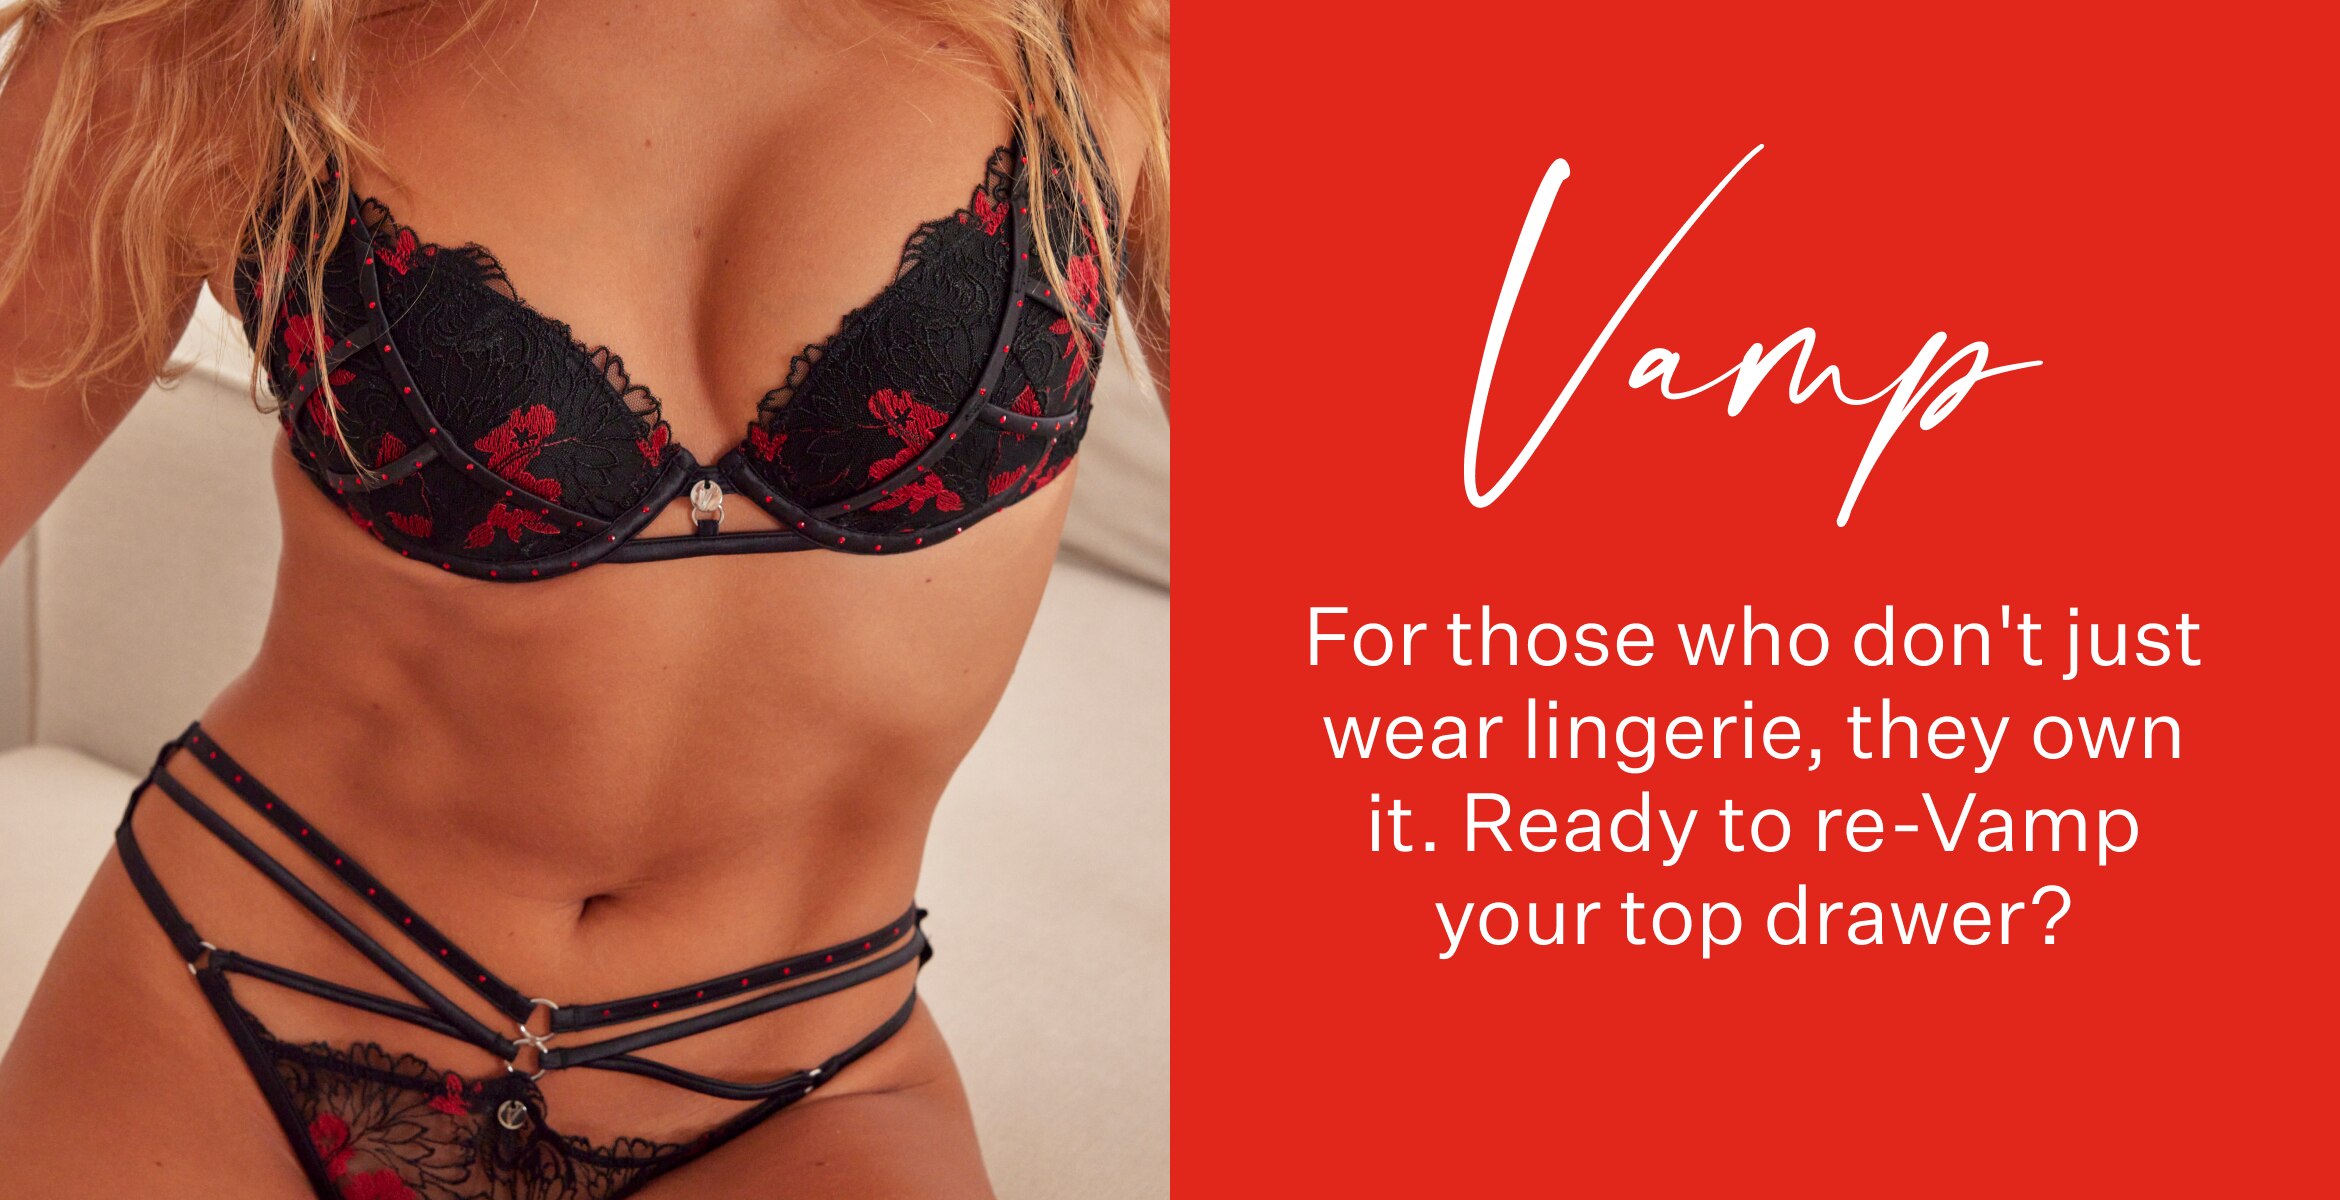 For those who don't just wear lingerie, they own it. Ready to re-Vamp your top drawer? 